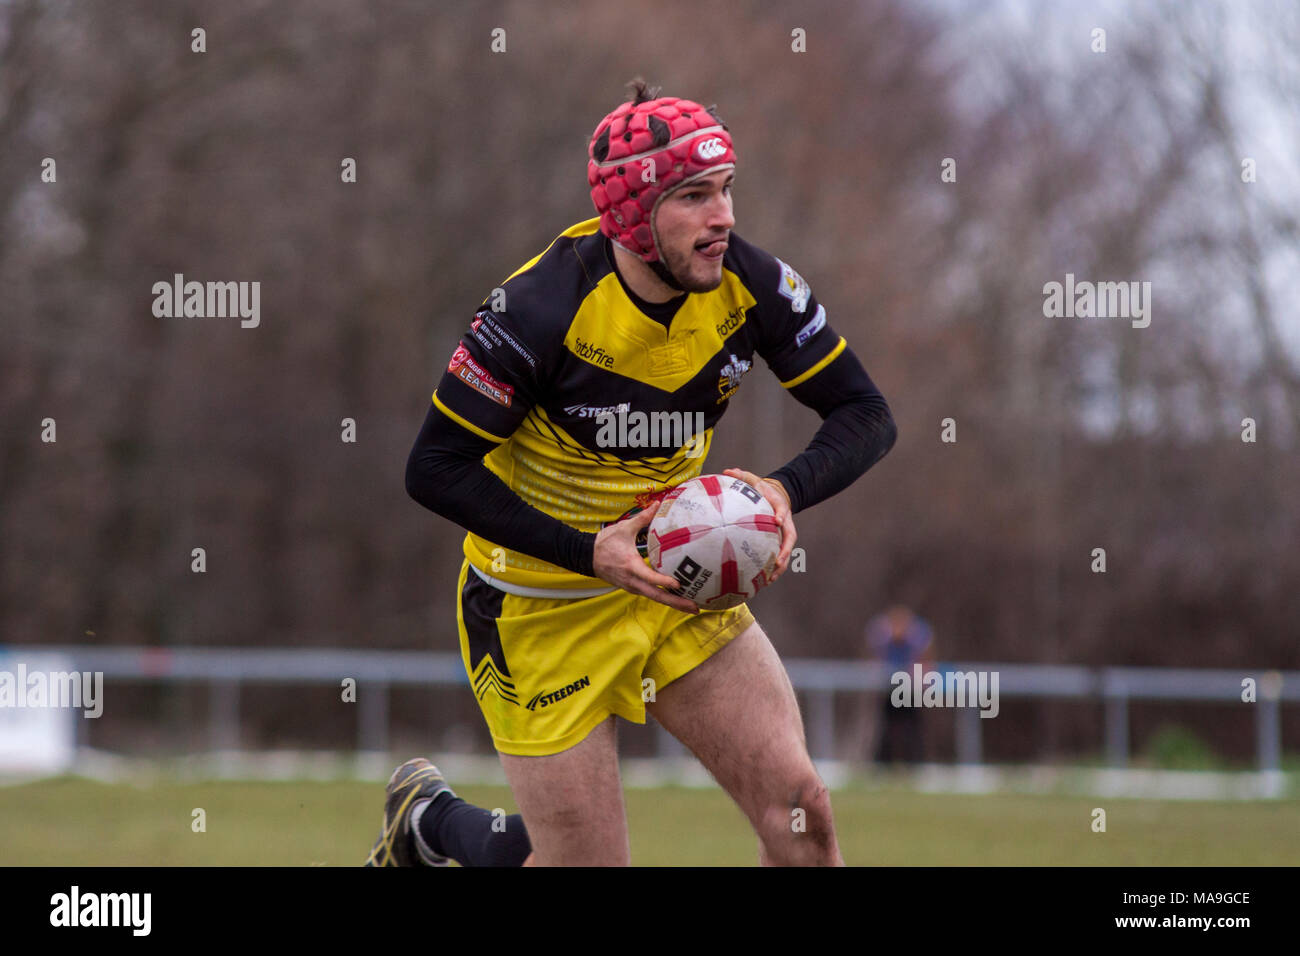 Llanelli, Wales. 29th Mar, 2018. West Wales Raiders face North Wales Crusaders in a Betfred League 1 Good Friday Derby Match at Stebonheath Park. Lewis Mitchell/Alamy Live News. Stock Photo